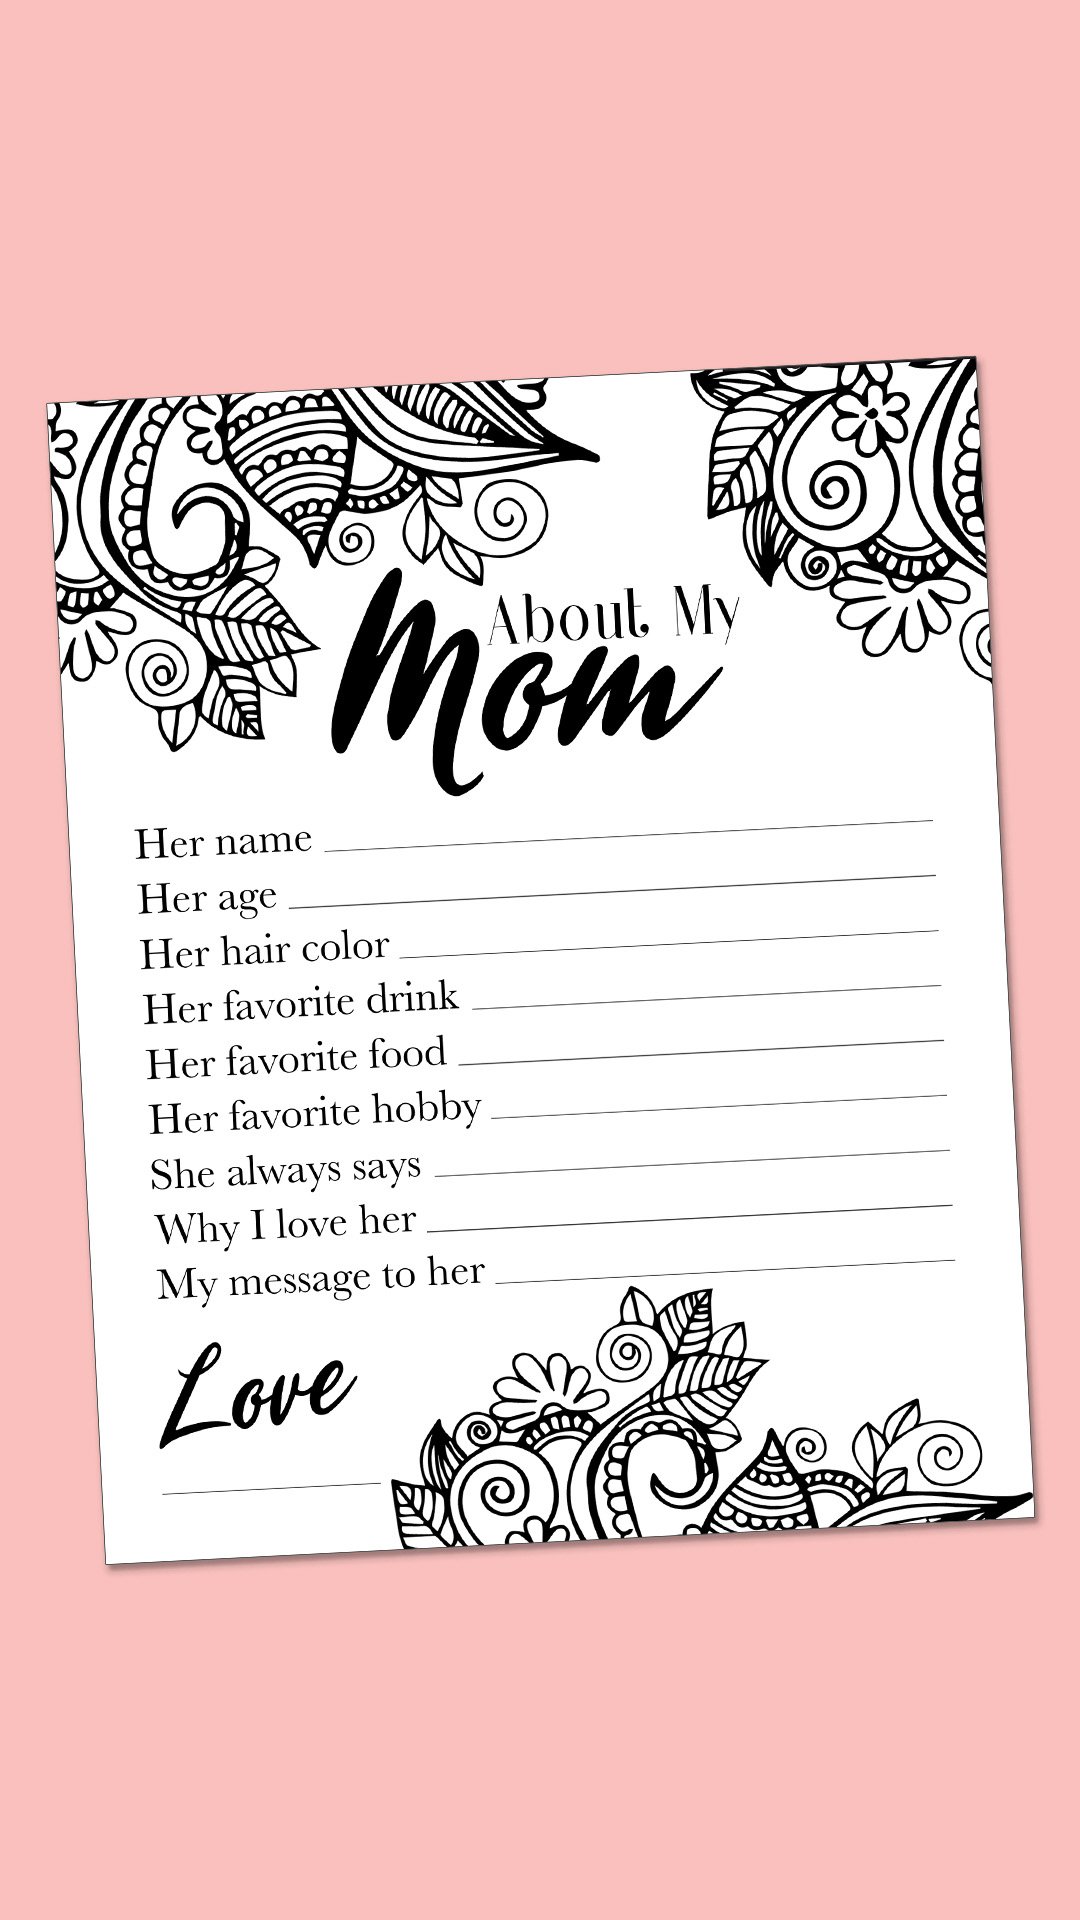 About My Mom: Mother’s Day Printable